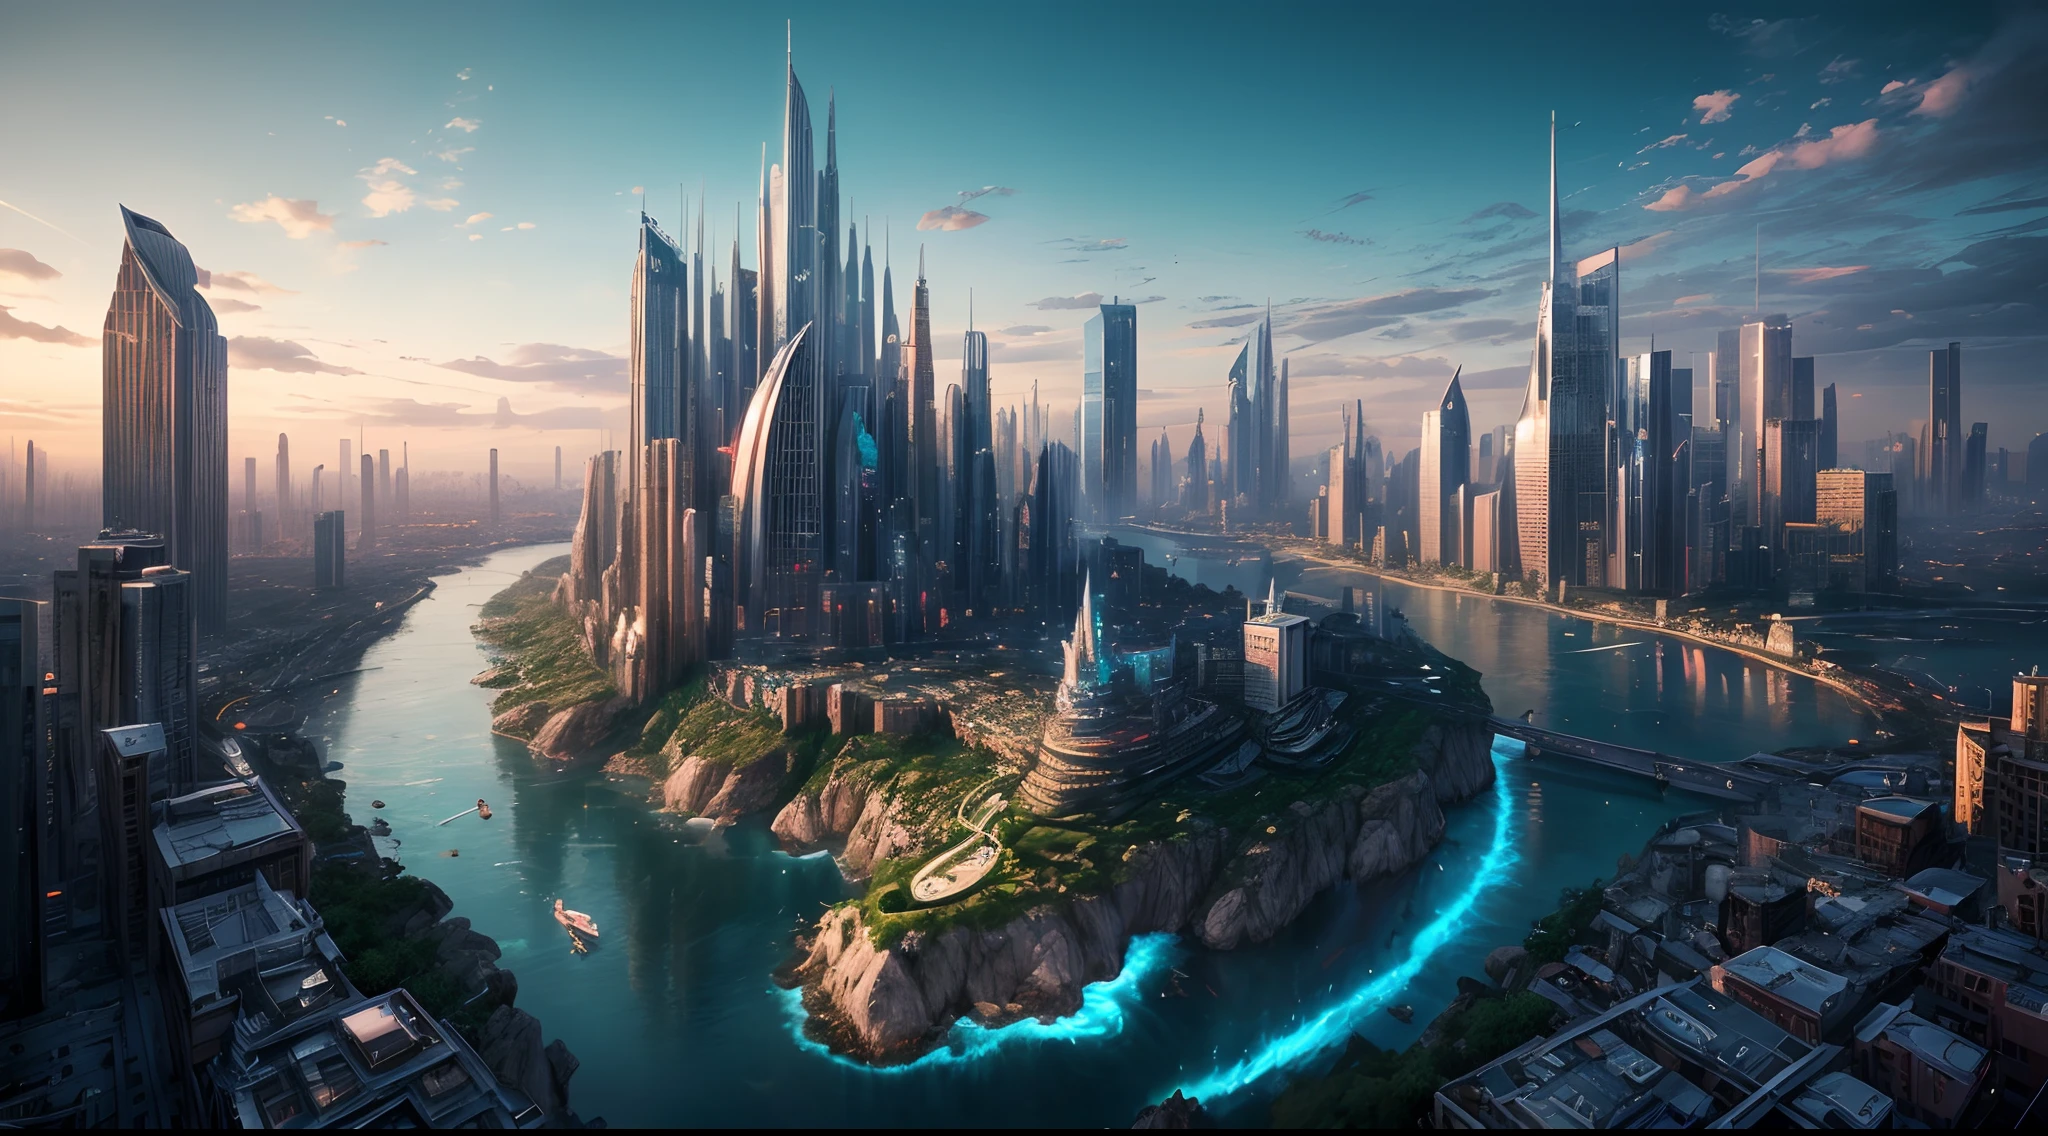 (best quality,4k,8k,highres,masterpiece:1.2),ultra-detailed,(realistic,photorealistic,photo-realistic:1.37),huge castles,skyscrapers floating in the sky,utopia,top quality fantasy,cyberpunk isekai,giants waterfall,mother nature,unimaginable,unbelievable,virtual reality,oasis of serenity,colorful neon lights,futuristic technology,vibrant cityscape,awe-inspiring architecture,unlimited possibilities,mesmerizing view,ethereal atmosphere,enchanting environment,majestic structures,thousands of feet high,sparkling clear water,breathtaking scenery,transcendent beauty,surreal landscape,architectural marvels,wonder of nature,harmony between man and nature,limitless imagination,urban paradise,dream-like setting,unrealistically magnificent,picture-perfect moments,serene tranquility,spellbinding aesthetic,awe-inducing skyline